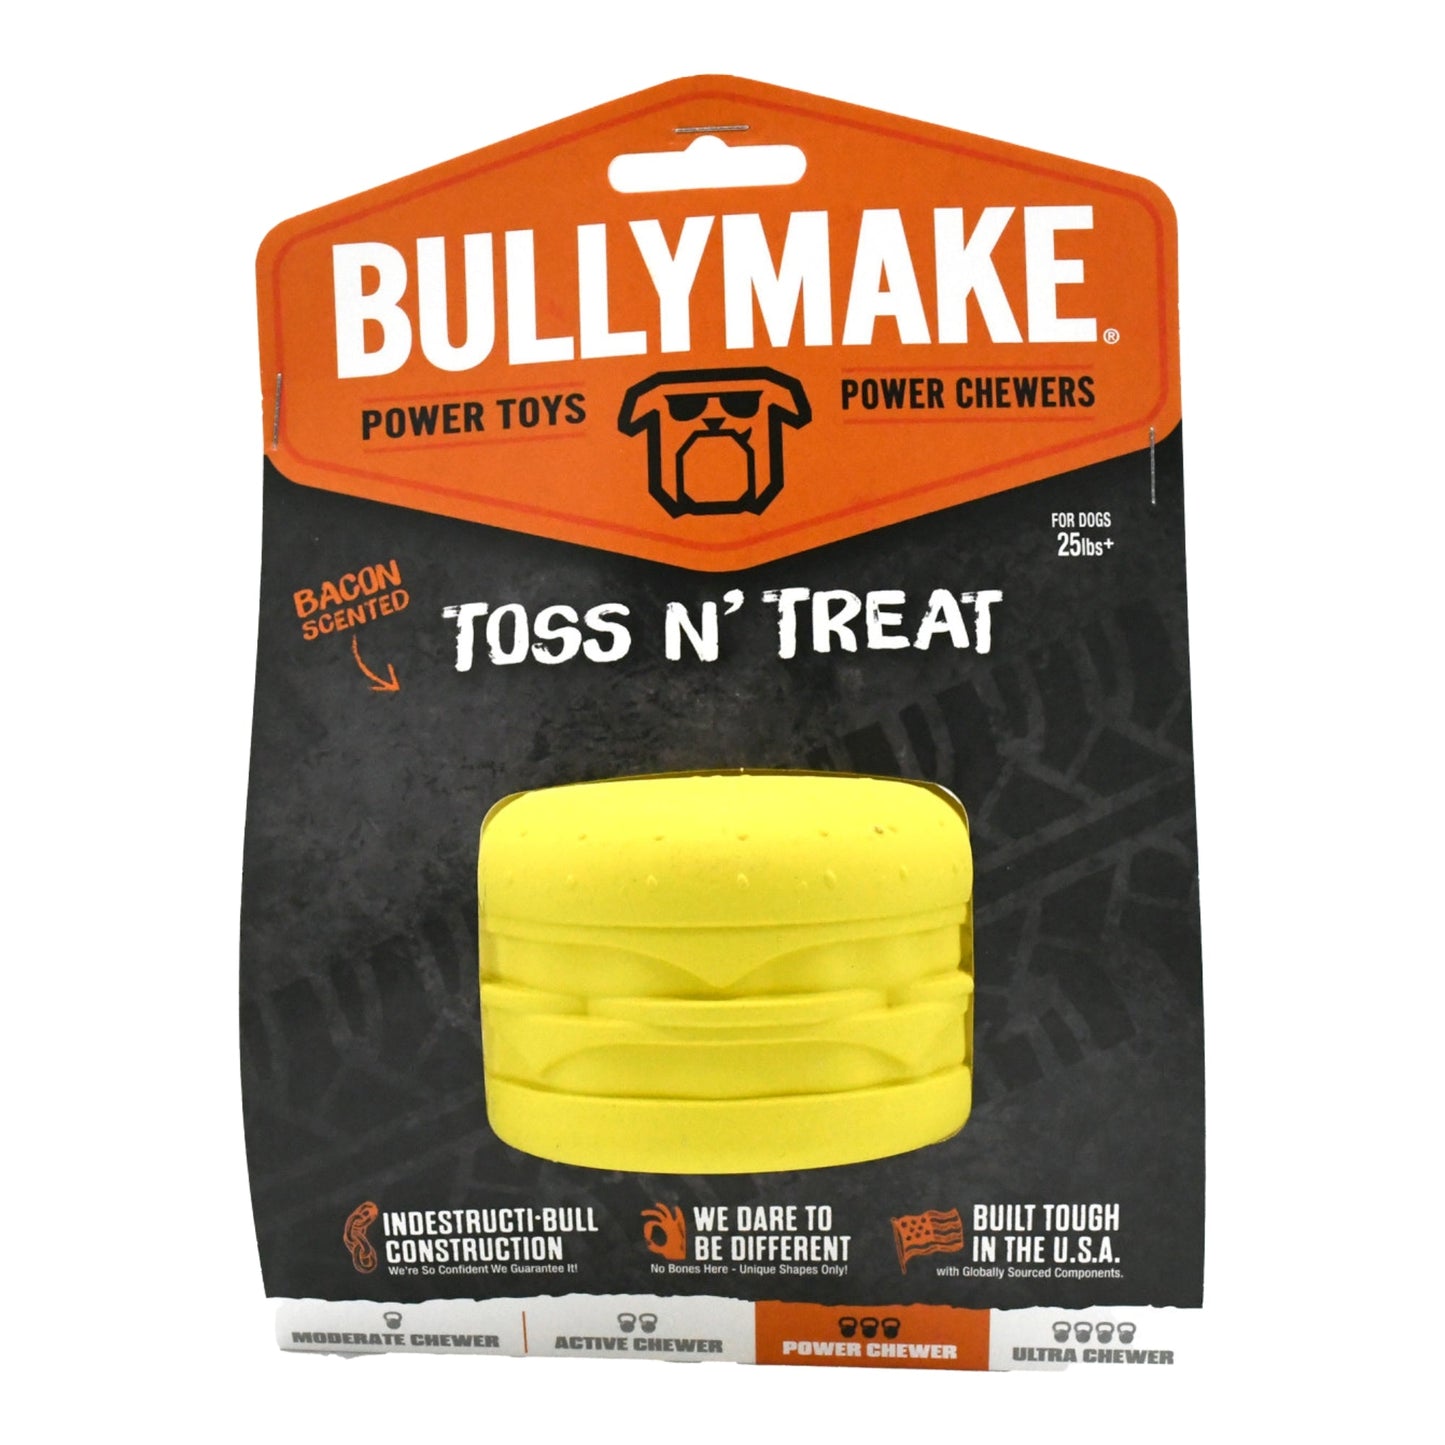 BullyMake Toss n' Treat Flavored Dog Chew Toy Cheeseburger, Bacon, 1ea/One Size